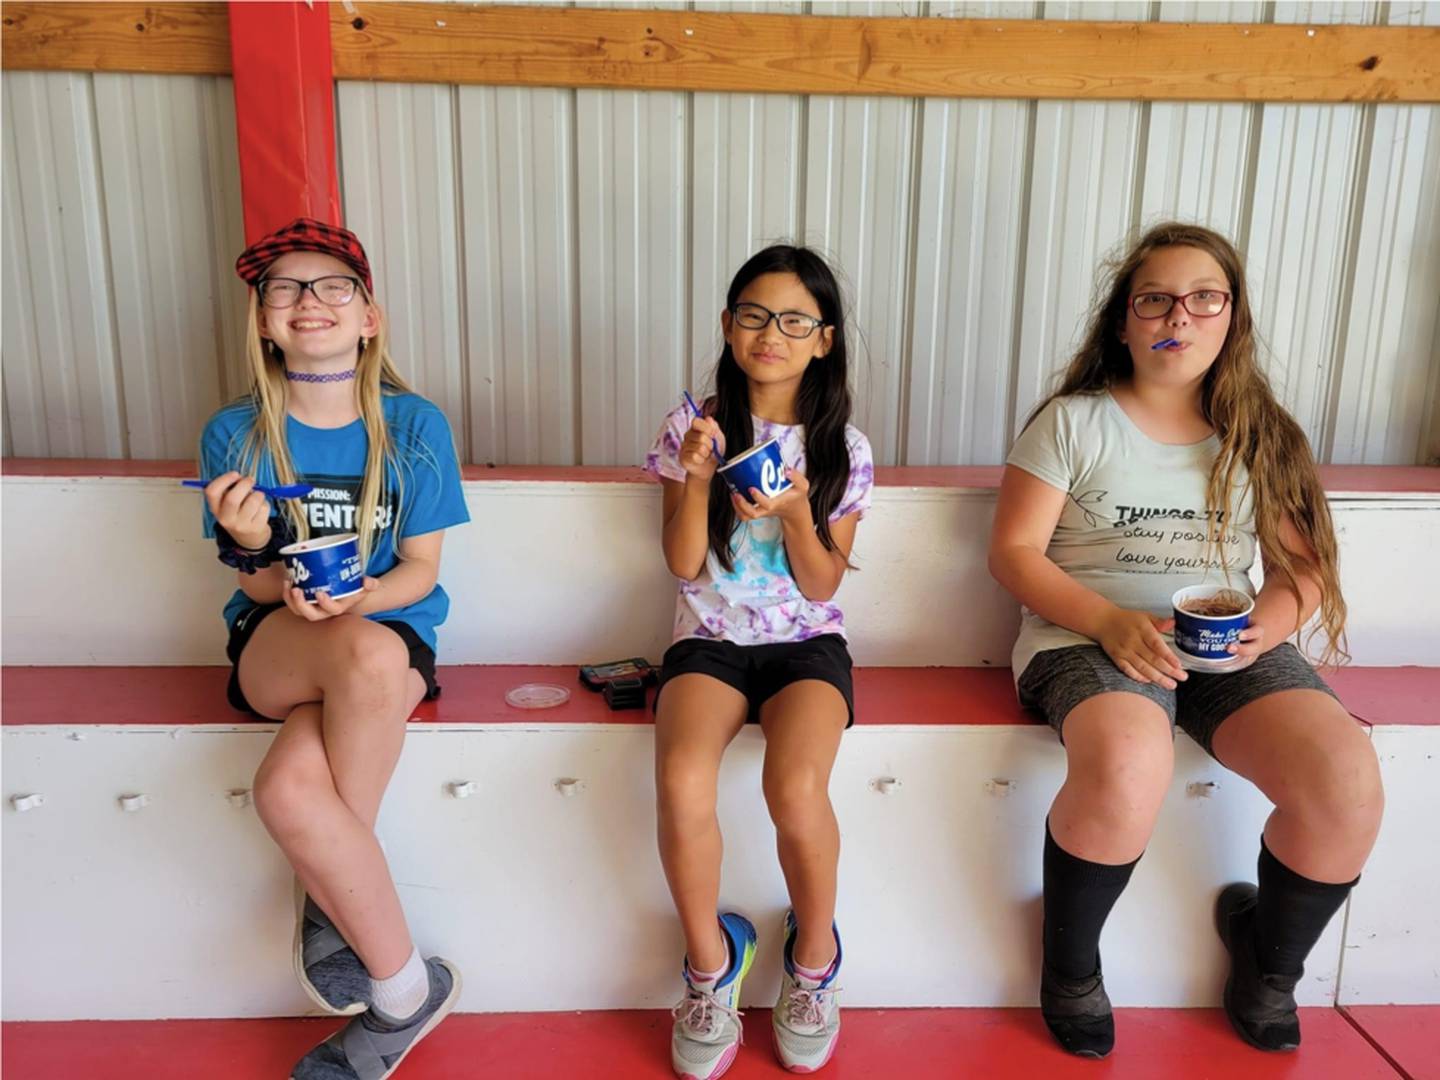 From left, Kyra Huisingh, Rachel Anton, and Rebekkah Huisingh enjoying a scoop custard after a hot day at the Whiteside County 4-H Show. Culver's in Rock Falls donated custard for 4-H members.